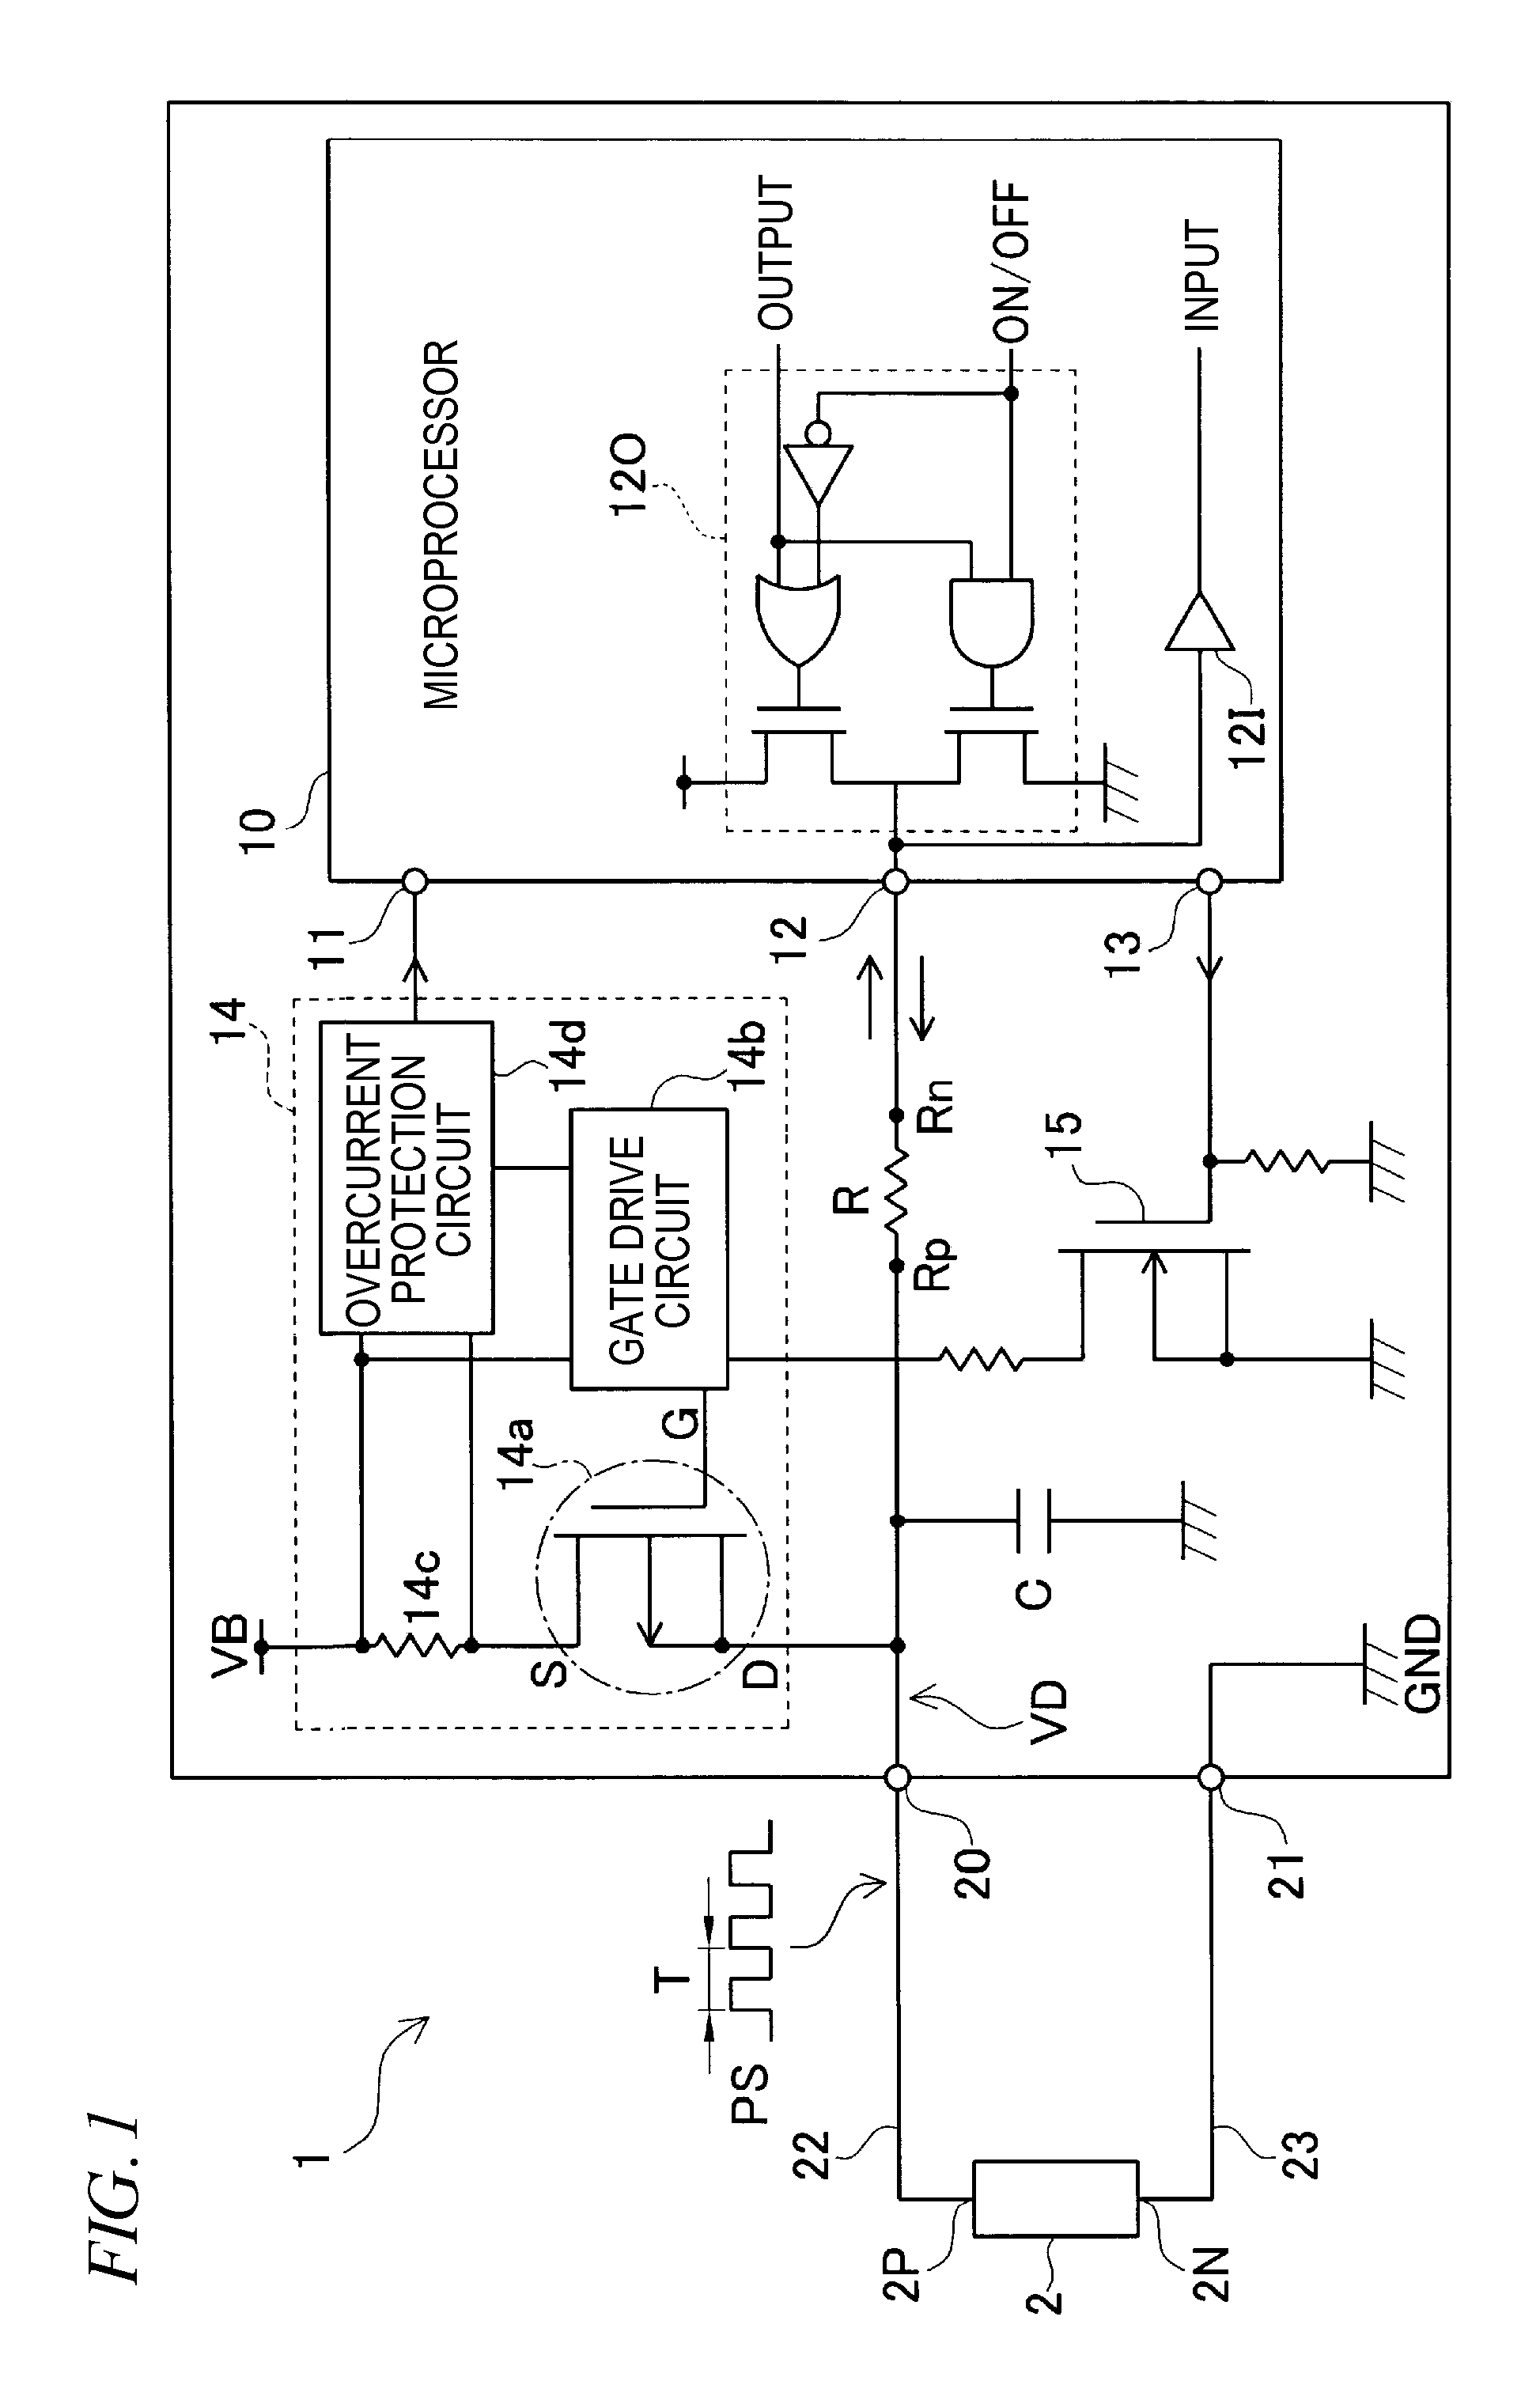 Load driving device